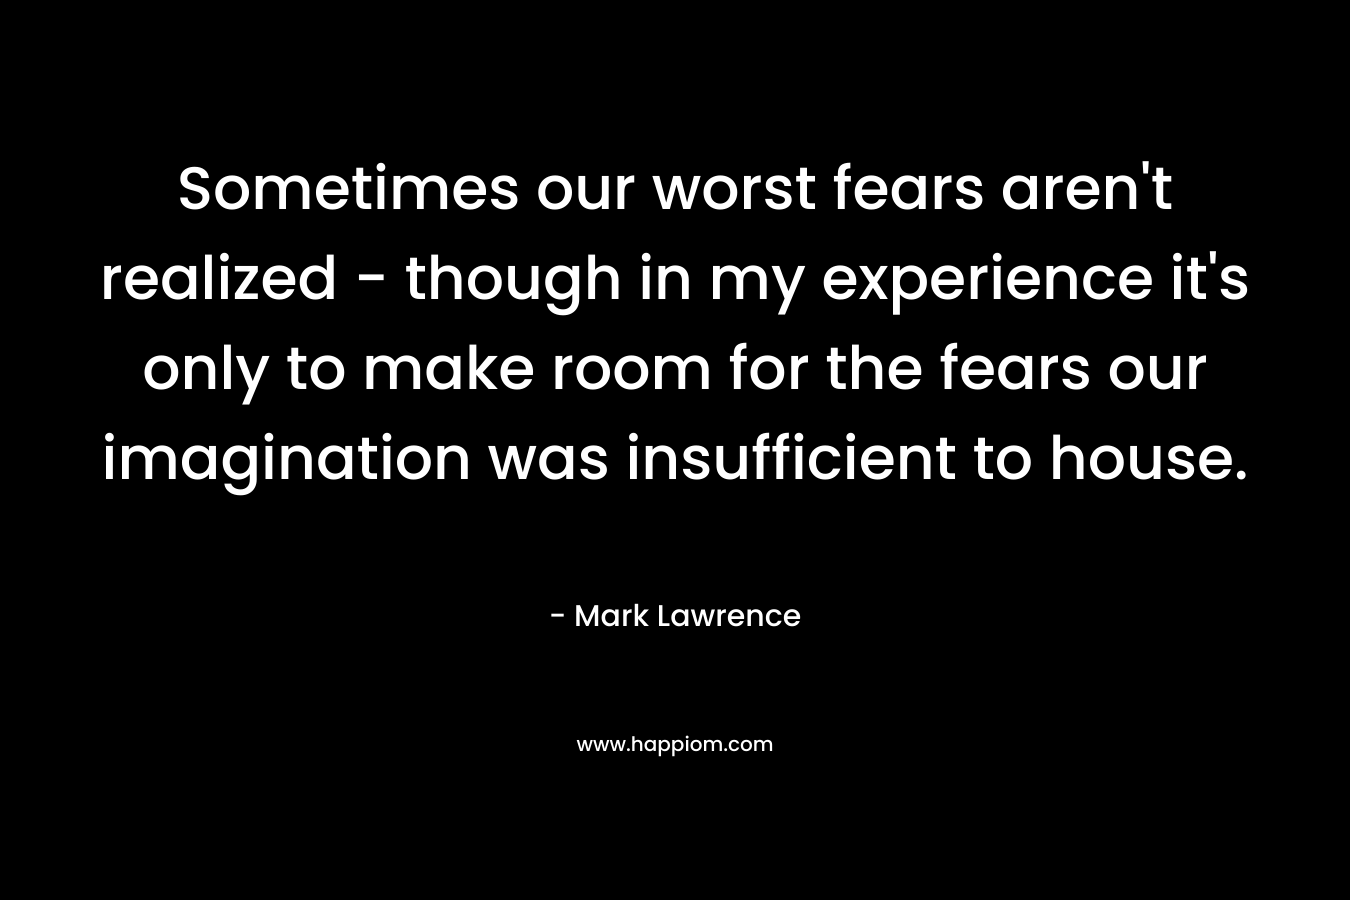 Sometimes our worst fears aren't realized - though in my experience it's only to make room for the fears our imagination was insufficient to house.